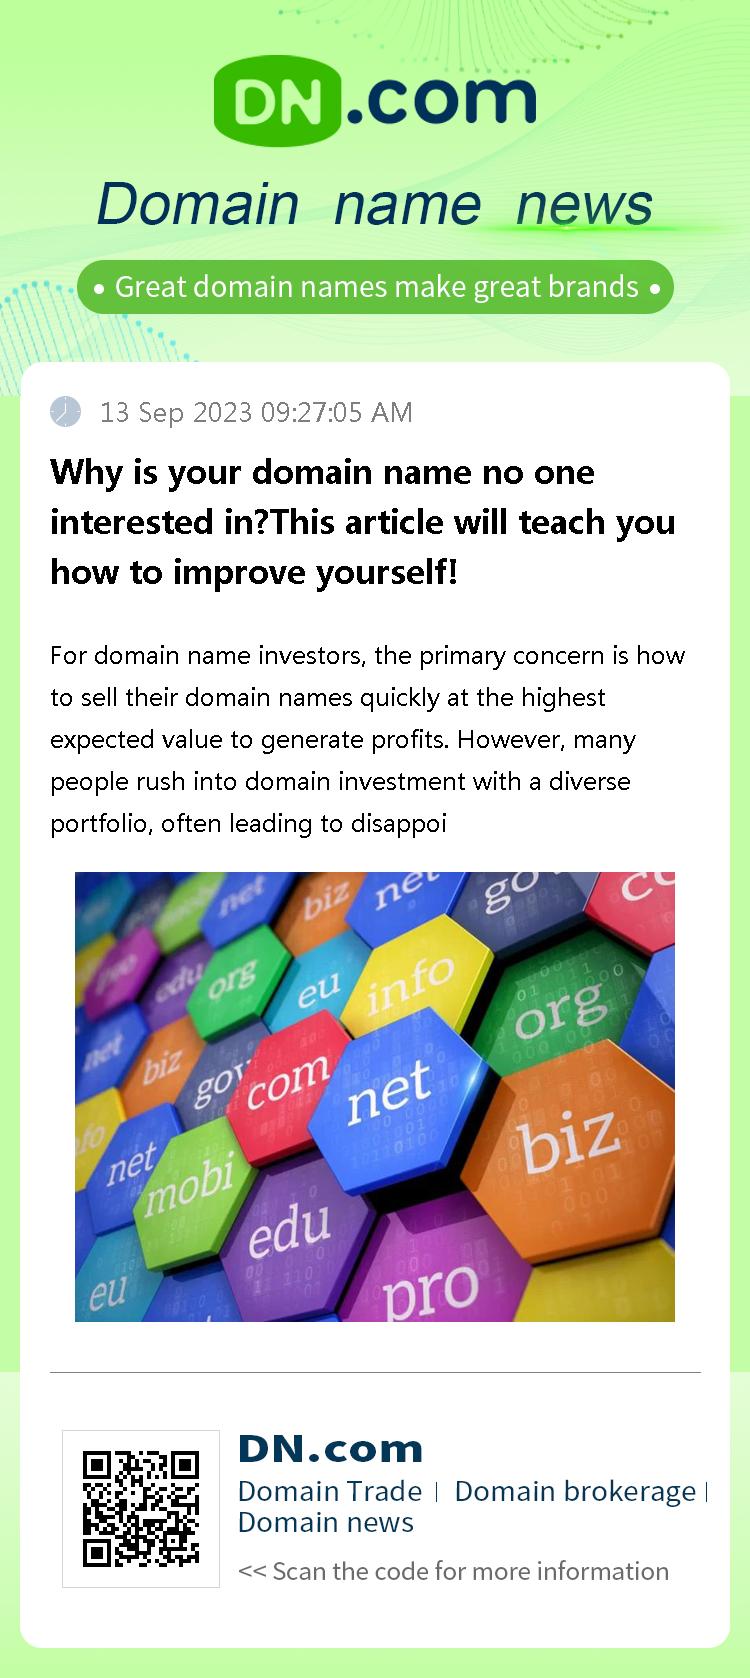 Why is your domain name no one interested in?This article will teach you how to improve yourself!